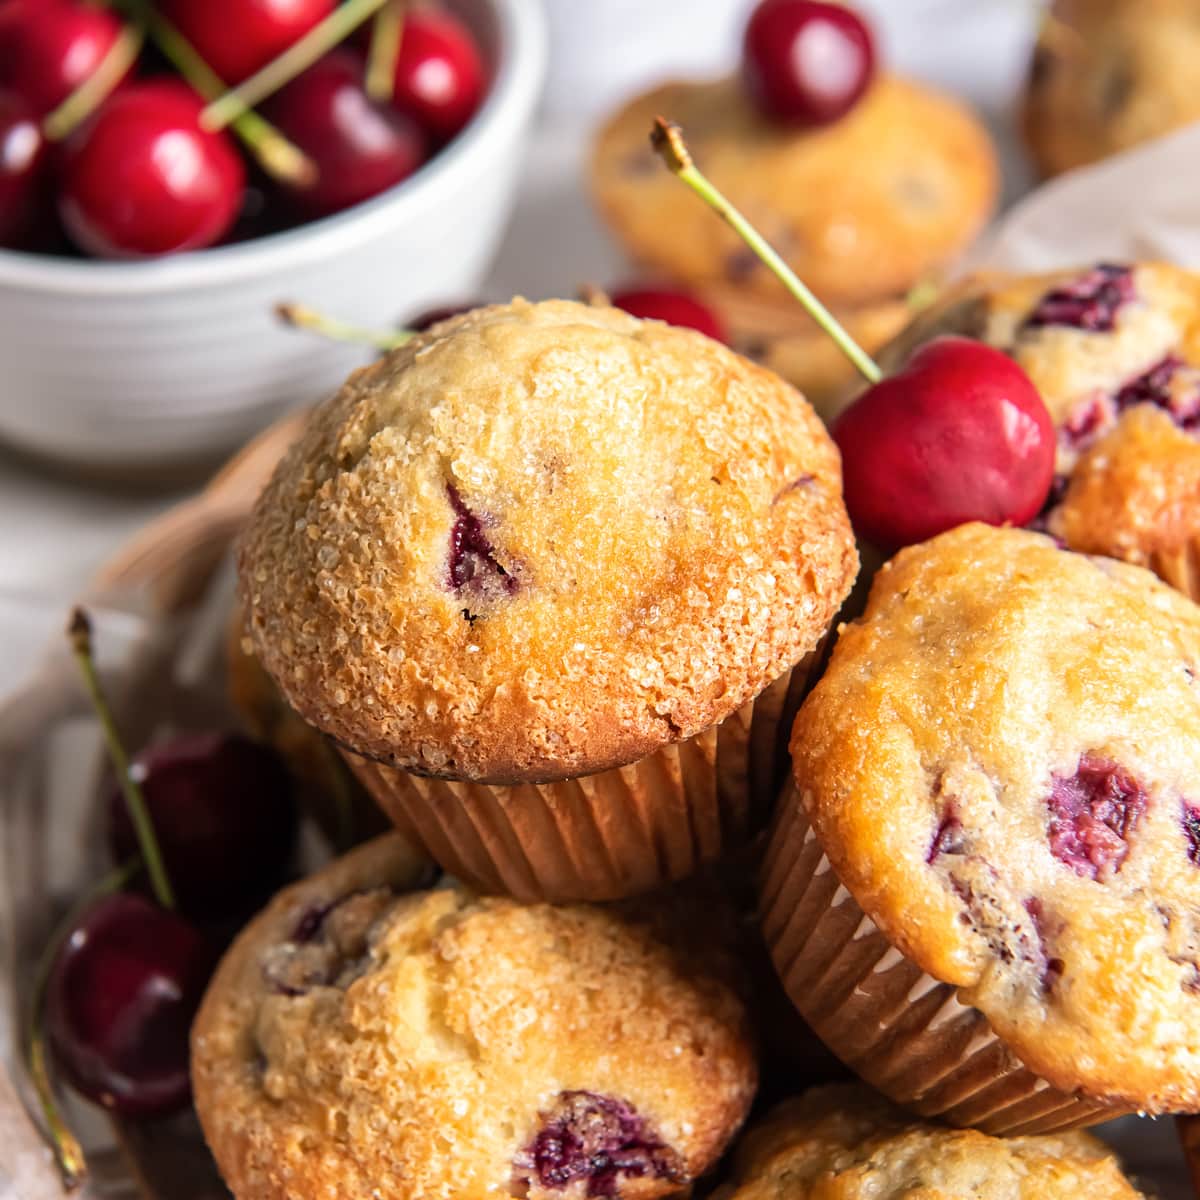 cherry muffins in a basket with a couple fresh cherries.